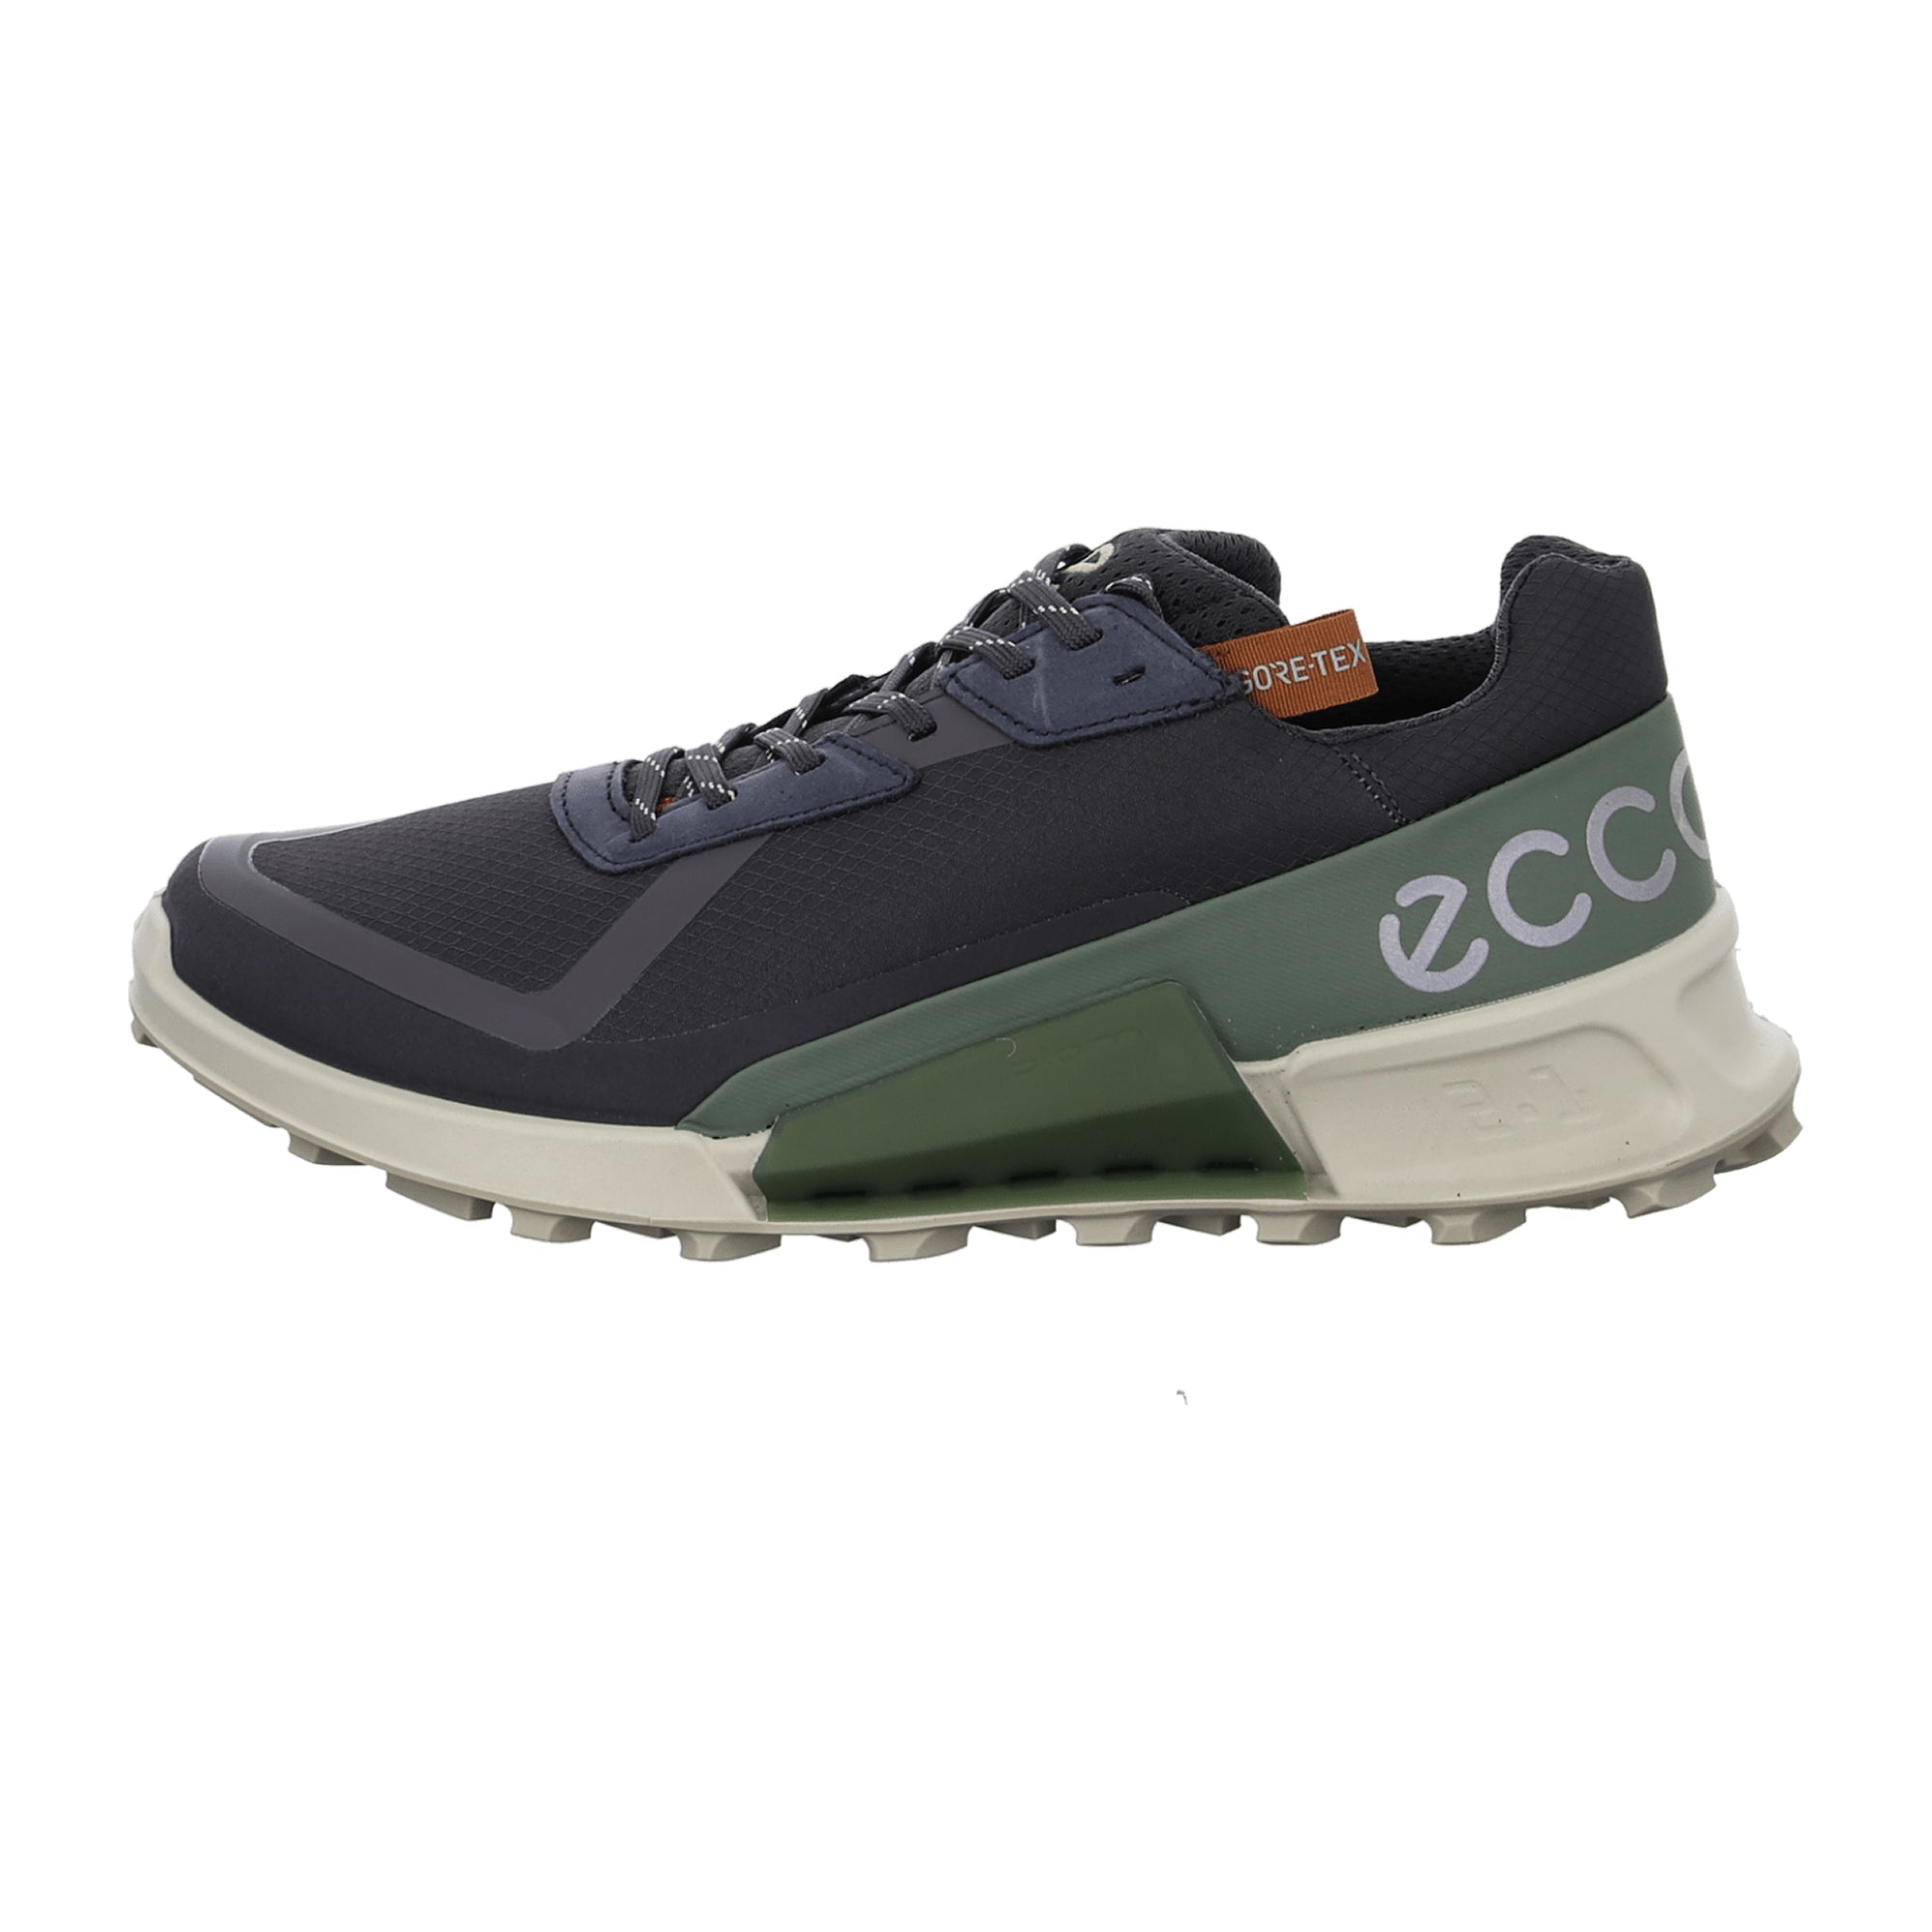 Ecco Men's Grey Outdoor Shoes - Durable & Stylish for Active Lifestyle